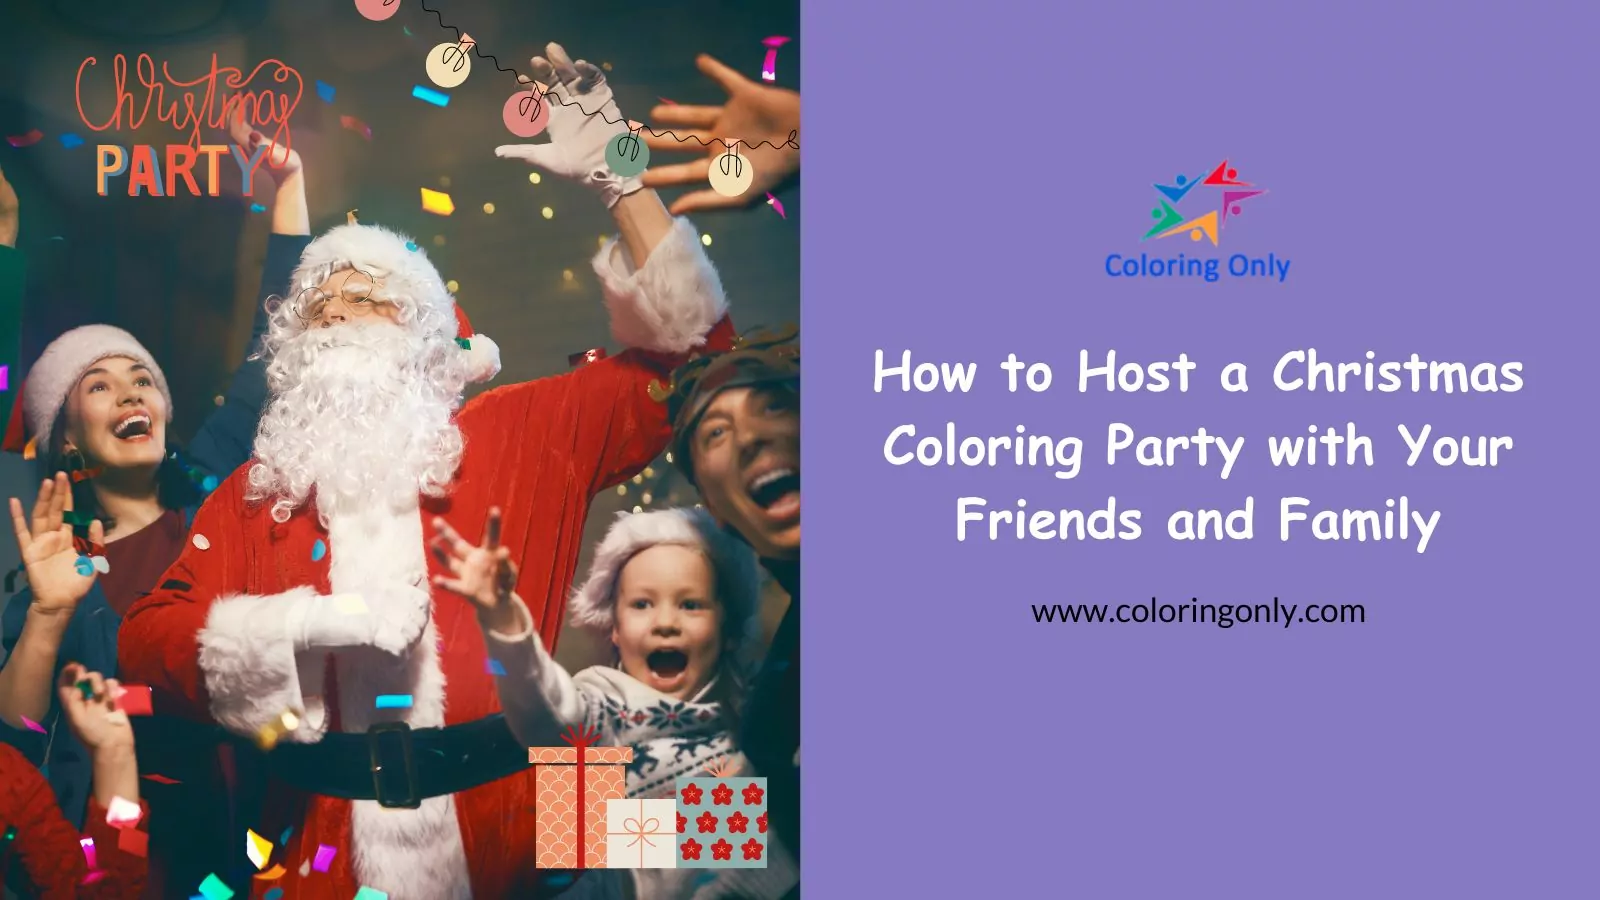 How to Host a Christmas Coloring Party with Your Friends and Family